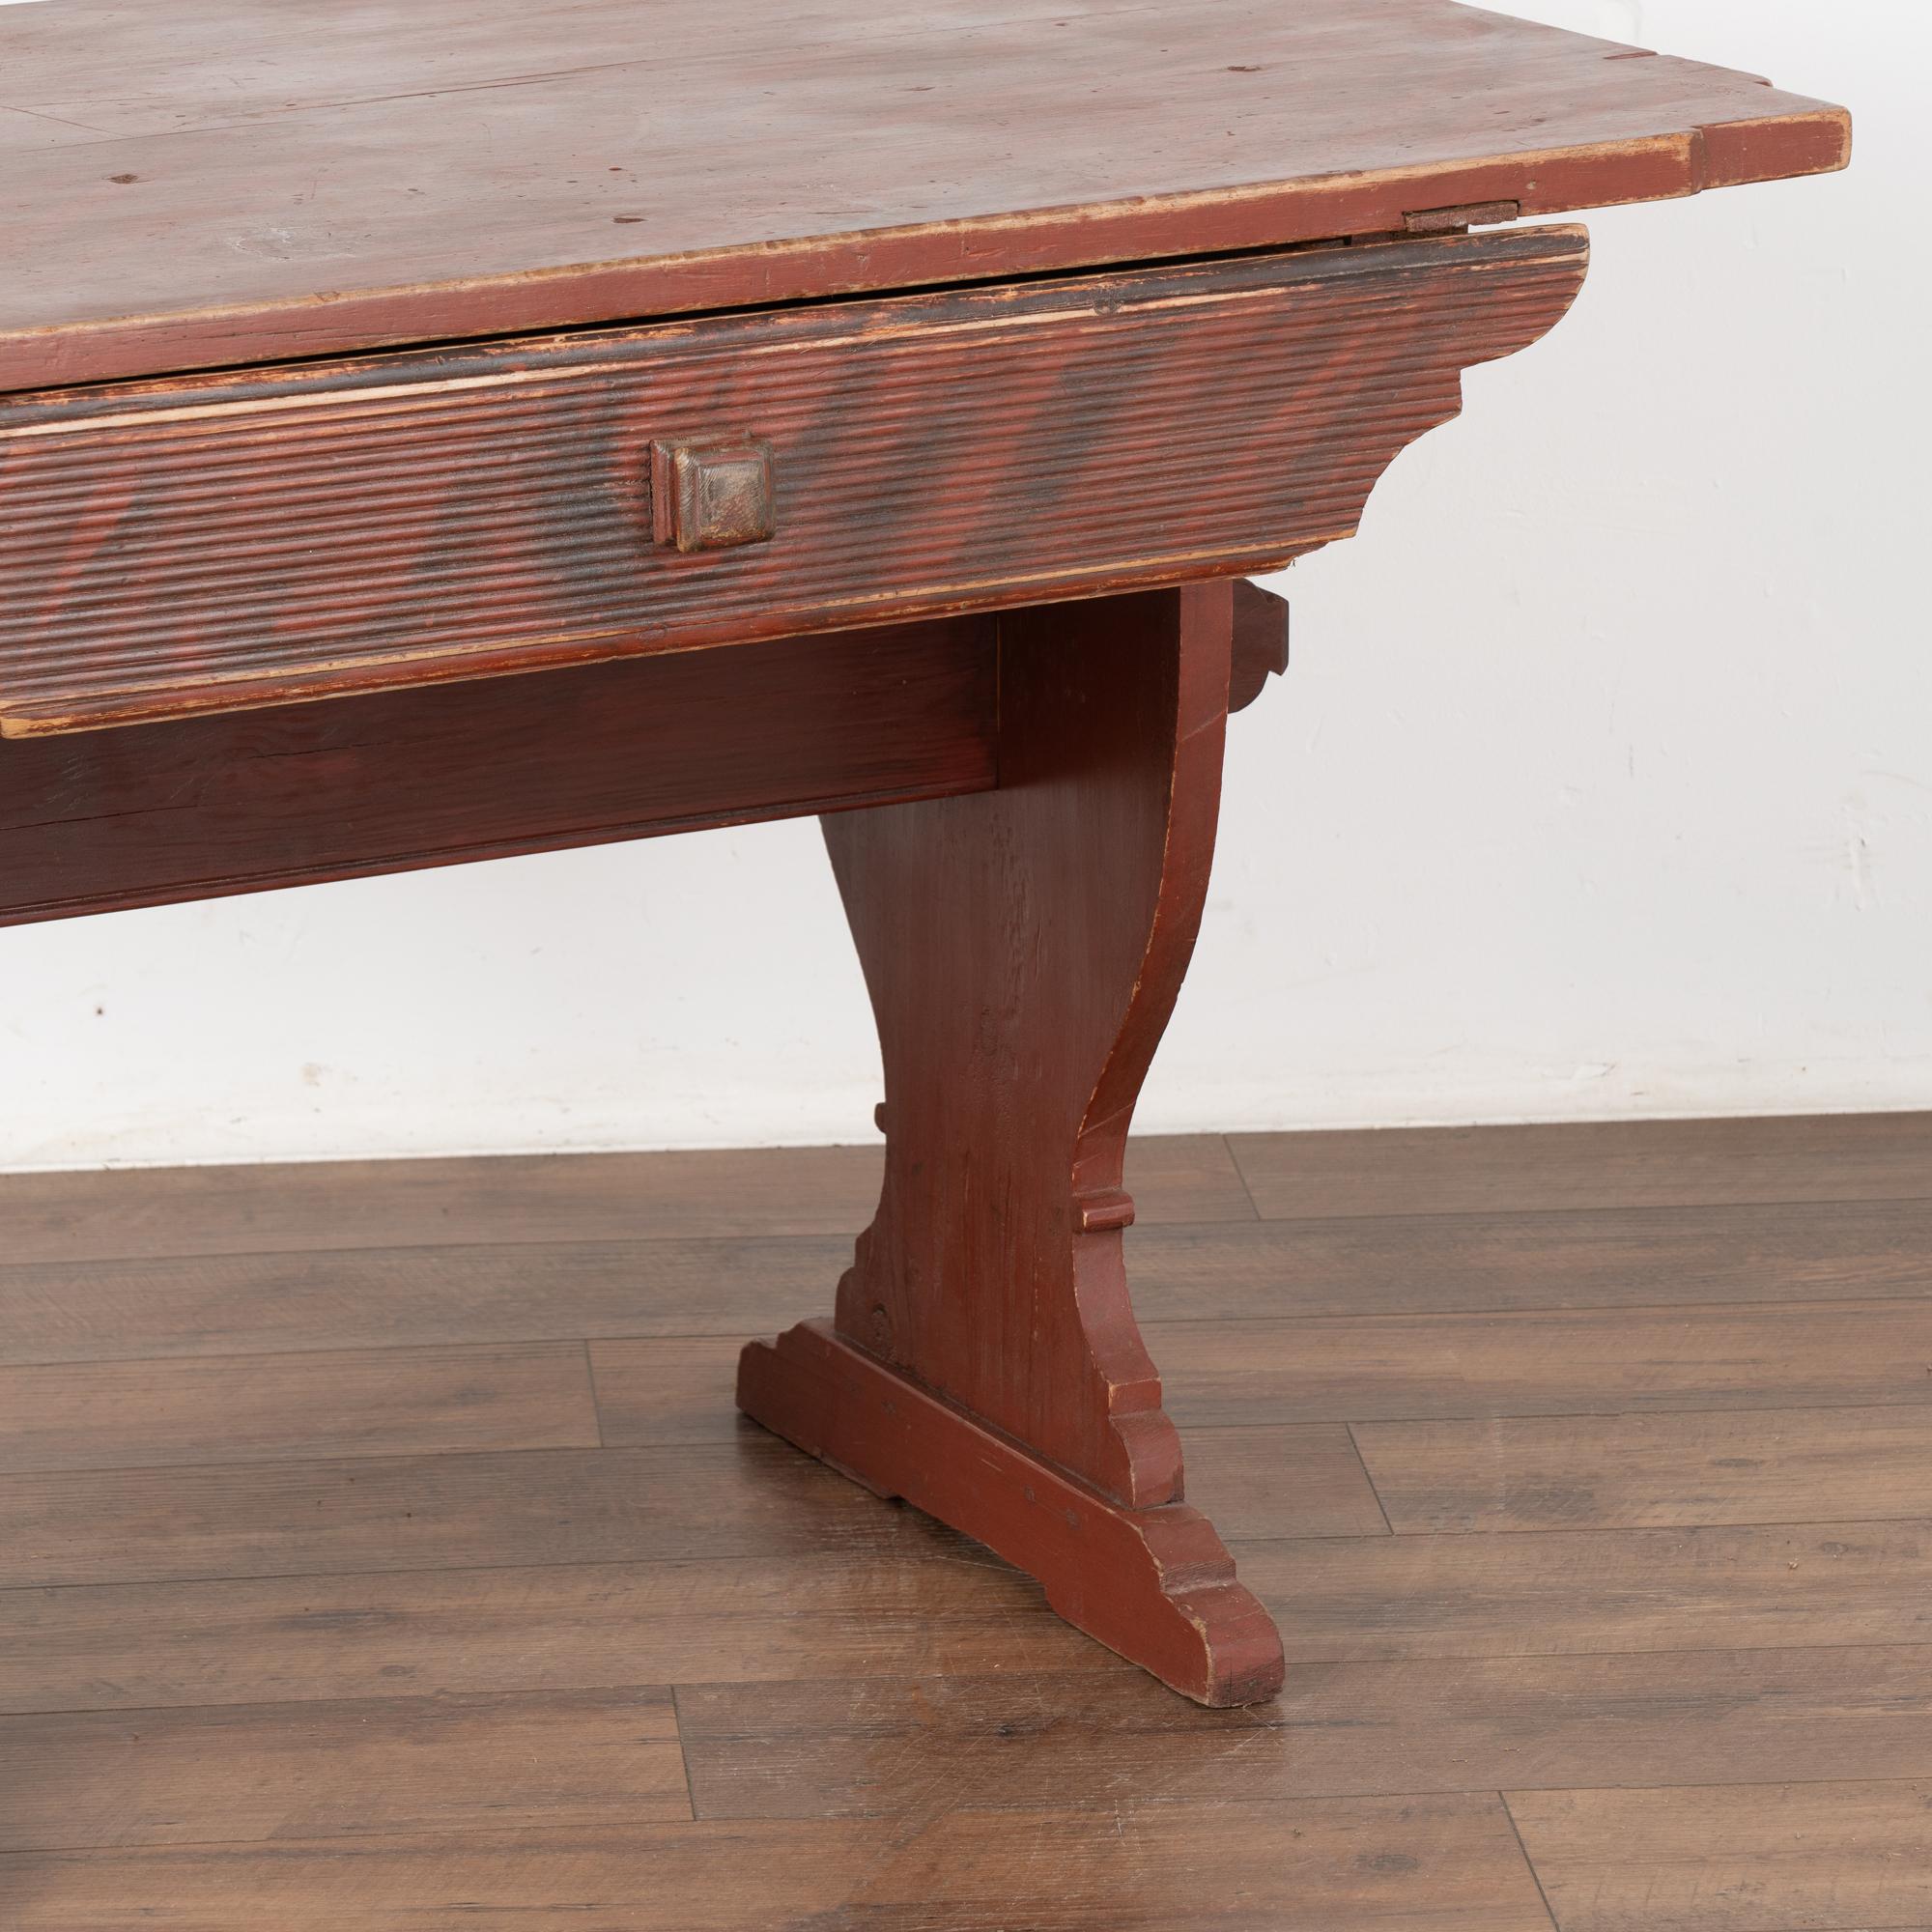 Original Red Painted Farm Table With Drawer, Sweden circa 1820-40 For Sale 1